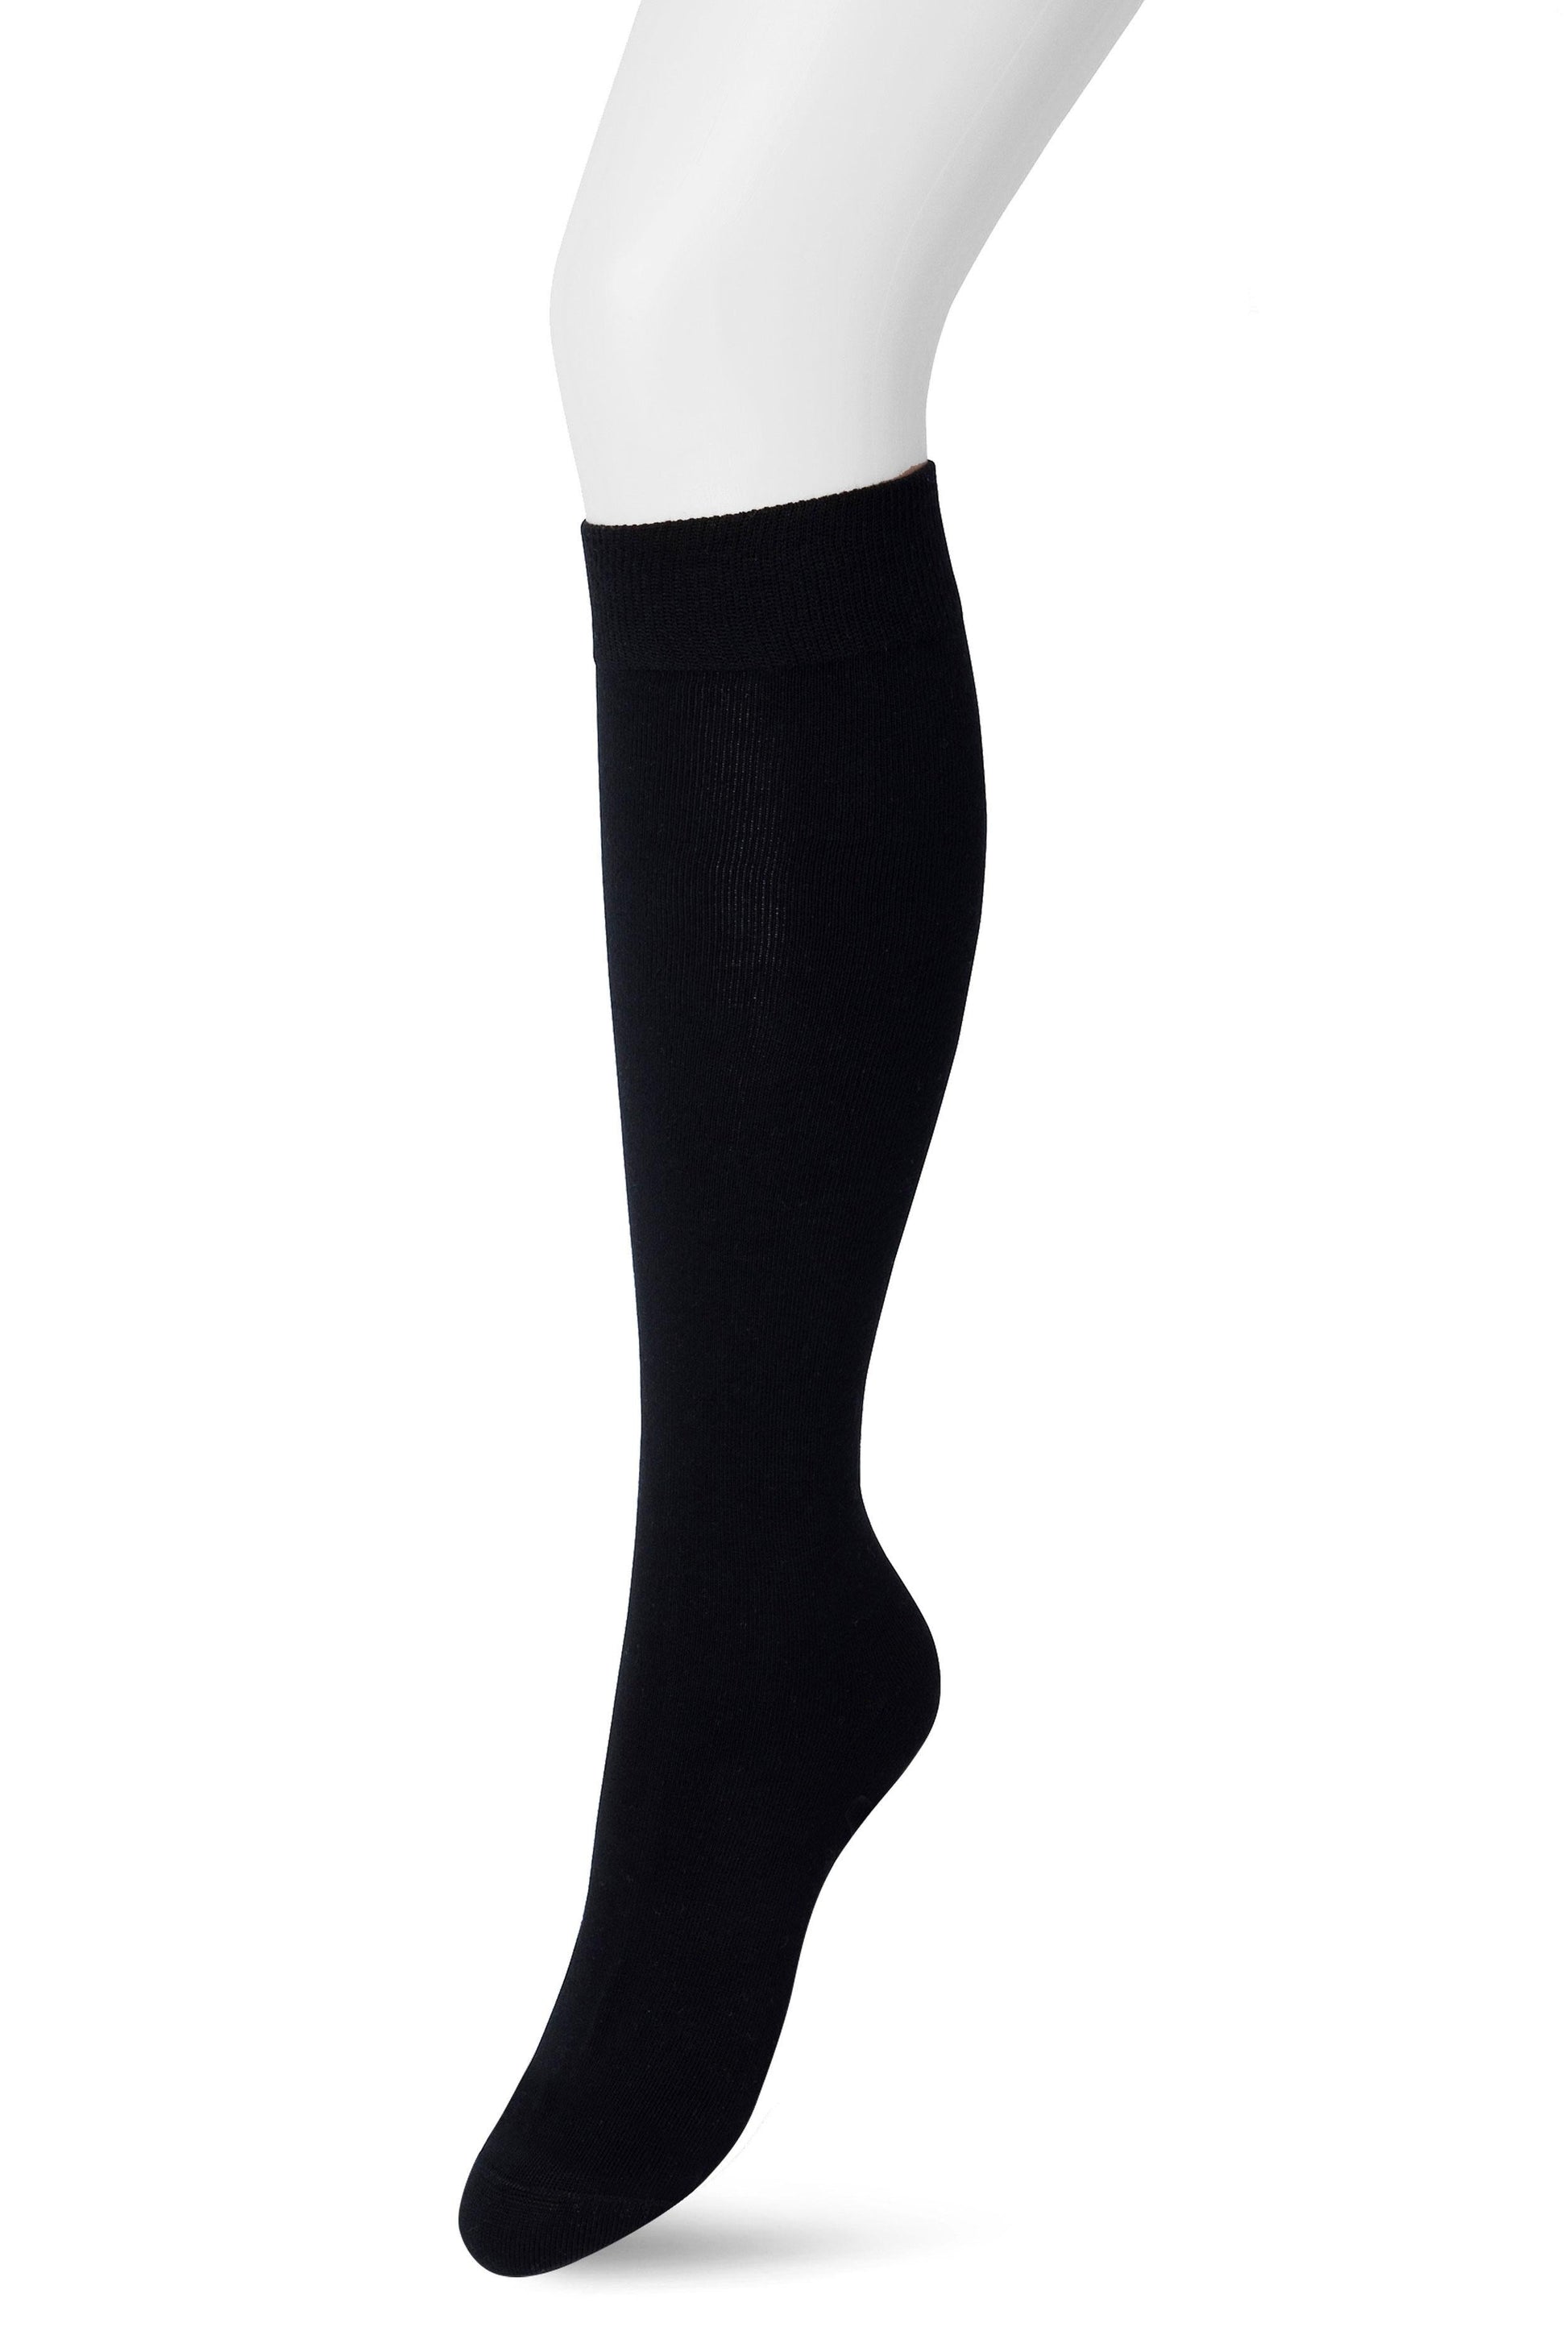 Bonnie Doon 83430 Cotton Knee-Highs - Black soft and plain cotton knee length socks with a shaped heel, flat toe seam and deep elasticated comfort cuff.